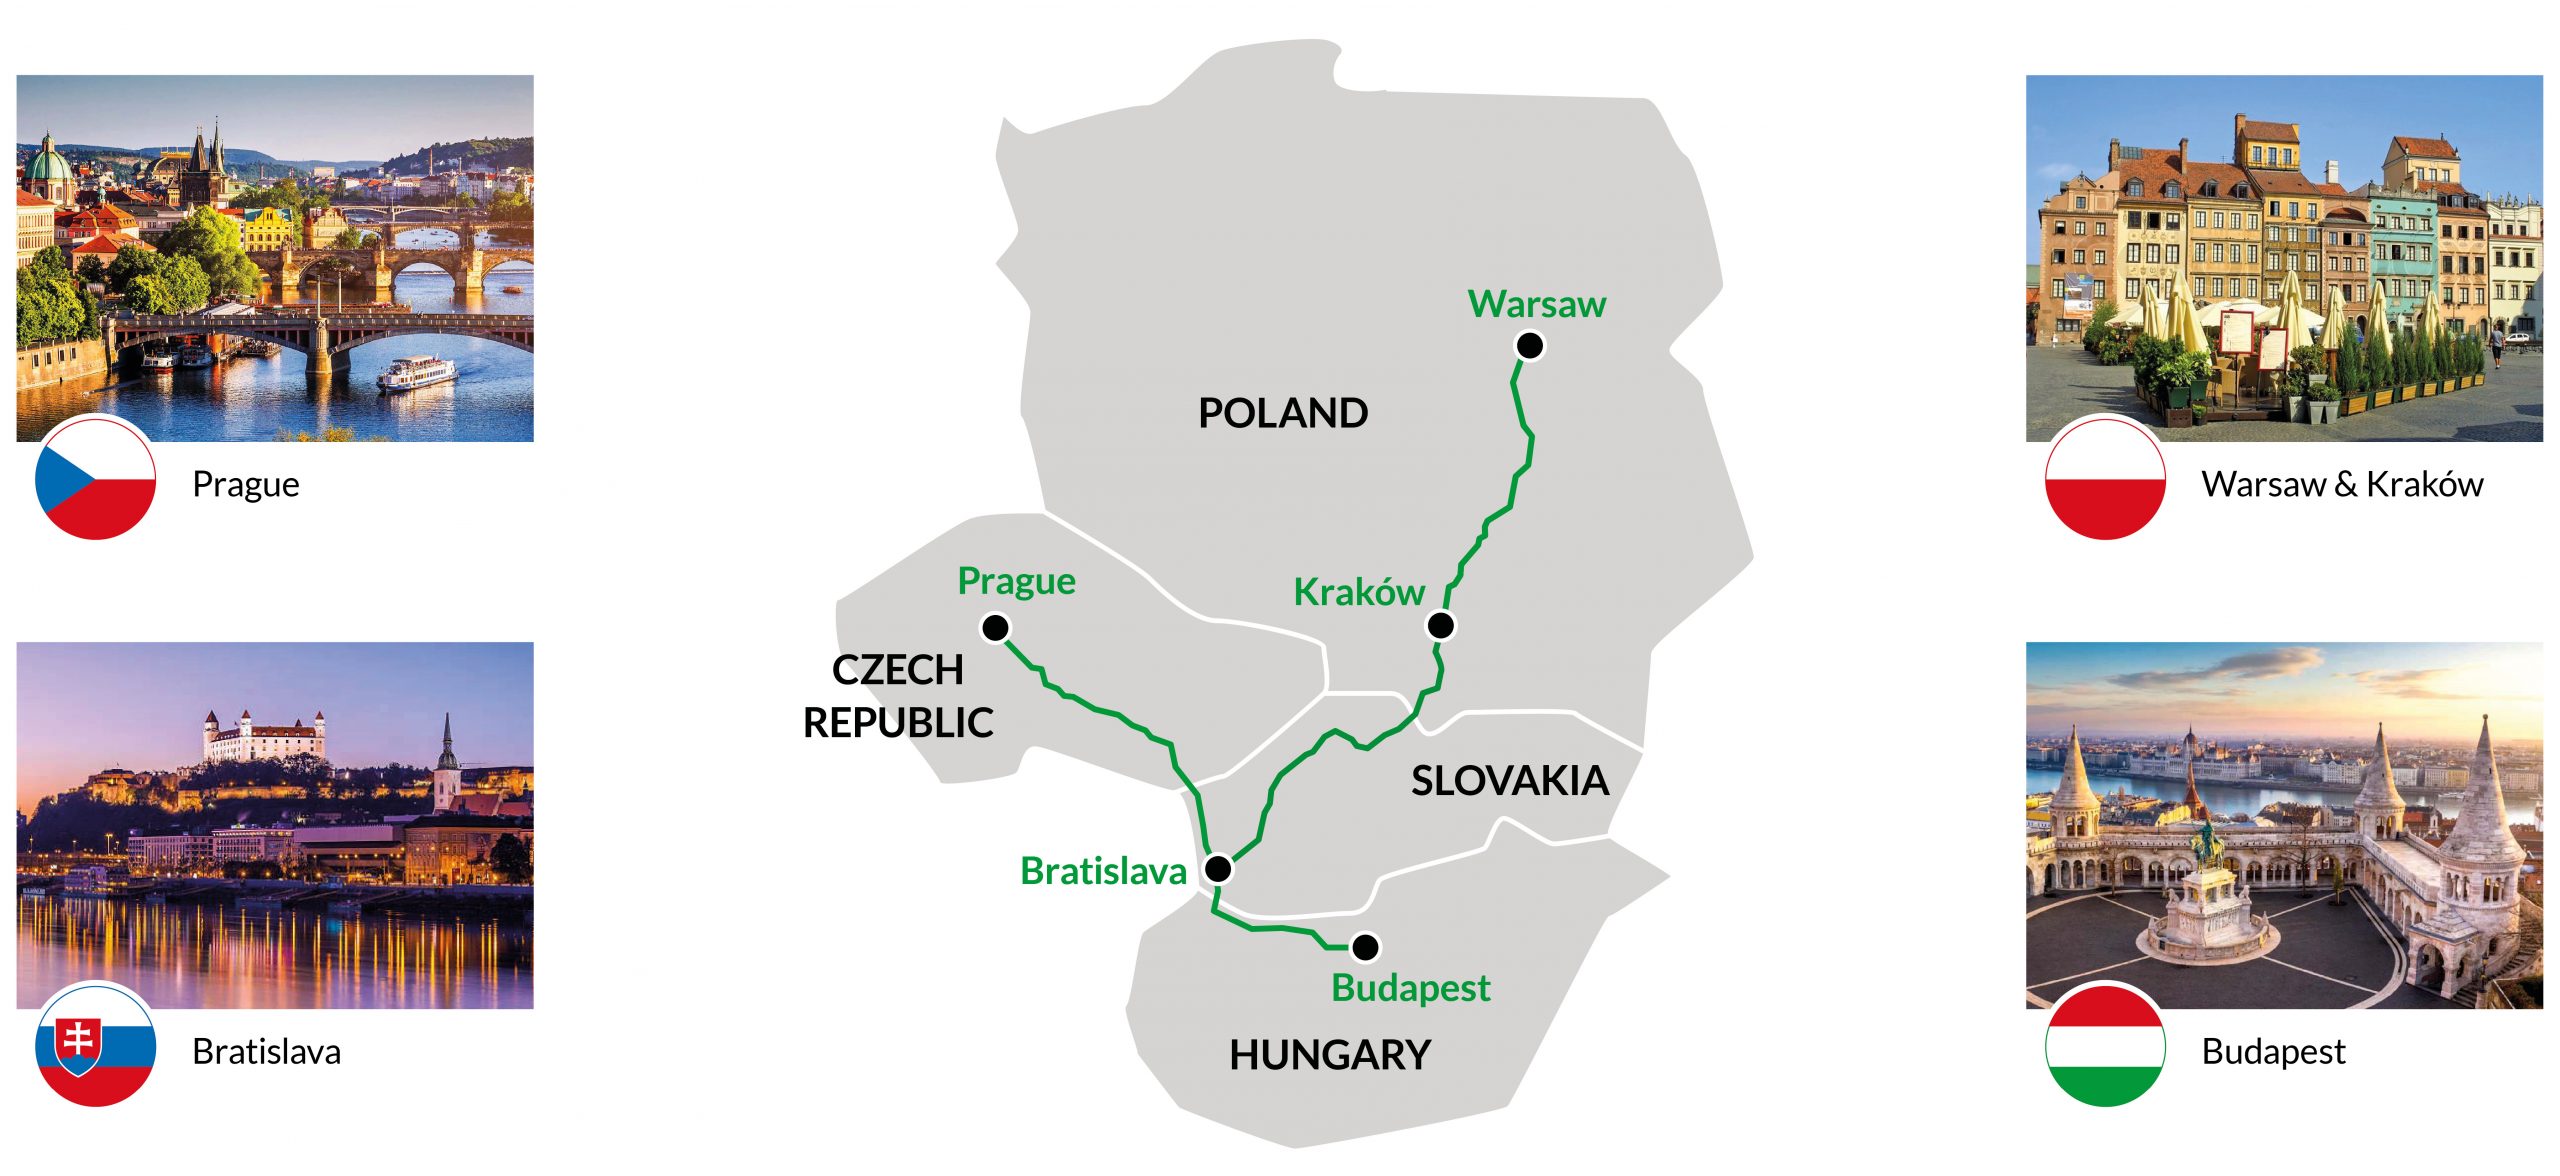 Roadshow_Map_routing_Eastern_Europe_NEW